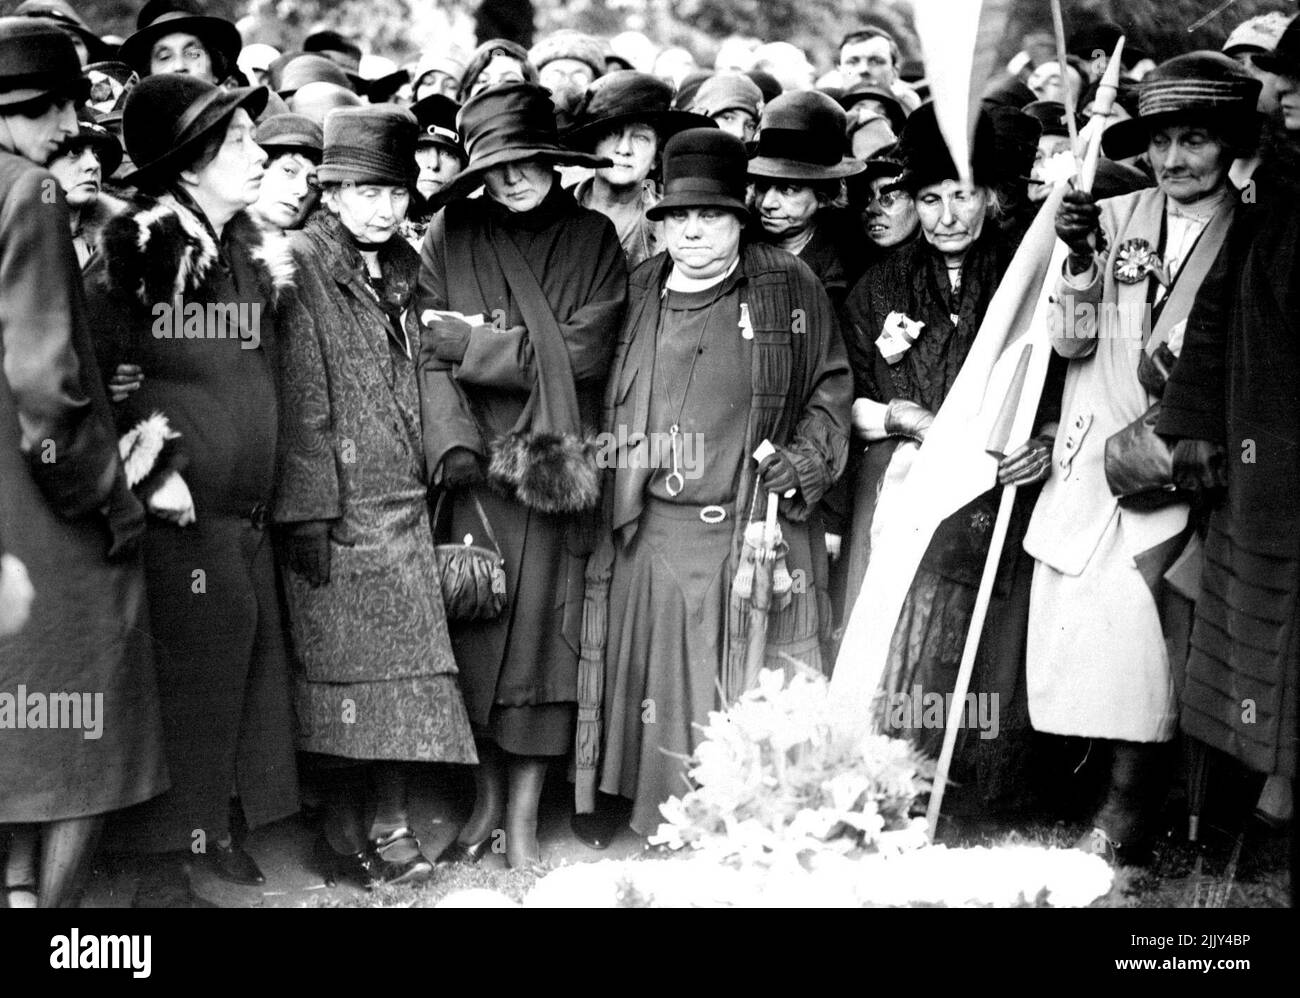 Funeral Of Mrs. Pankhurst. Miss Christabel Oankhurst, Mrs. Lrummond, and other prominent surfragists at the graveside. The funeral service of Mrs. pankhurst, took place at St. John's Church, Westminster. Women who took part in the militant movement followed the cortege to brompton cemetery. Nine ex-militant suffragettes, all of whom suffered imprisonment acted as pall-bearers. July 01, 1928. (Photo by Central News). Stock Photo